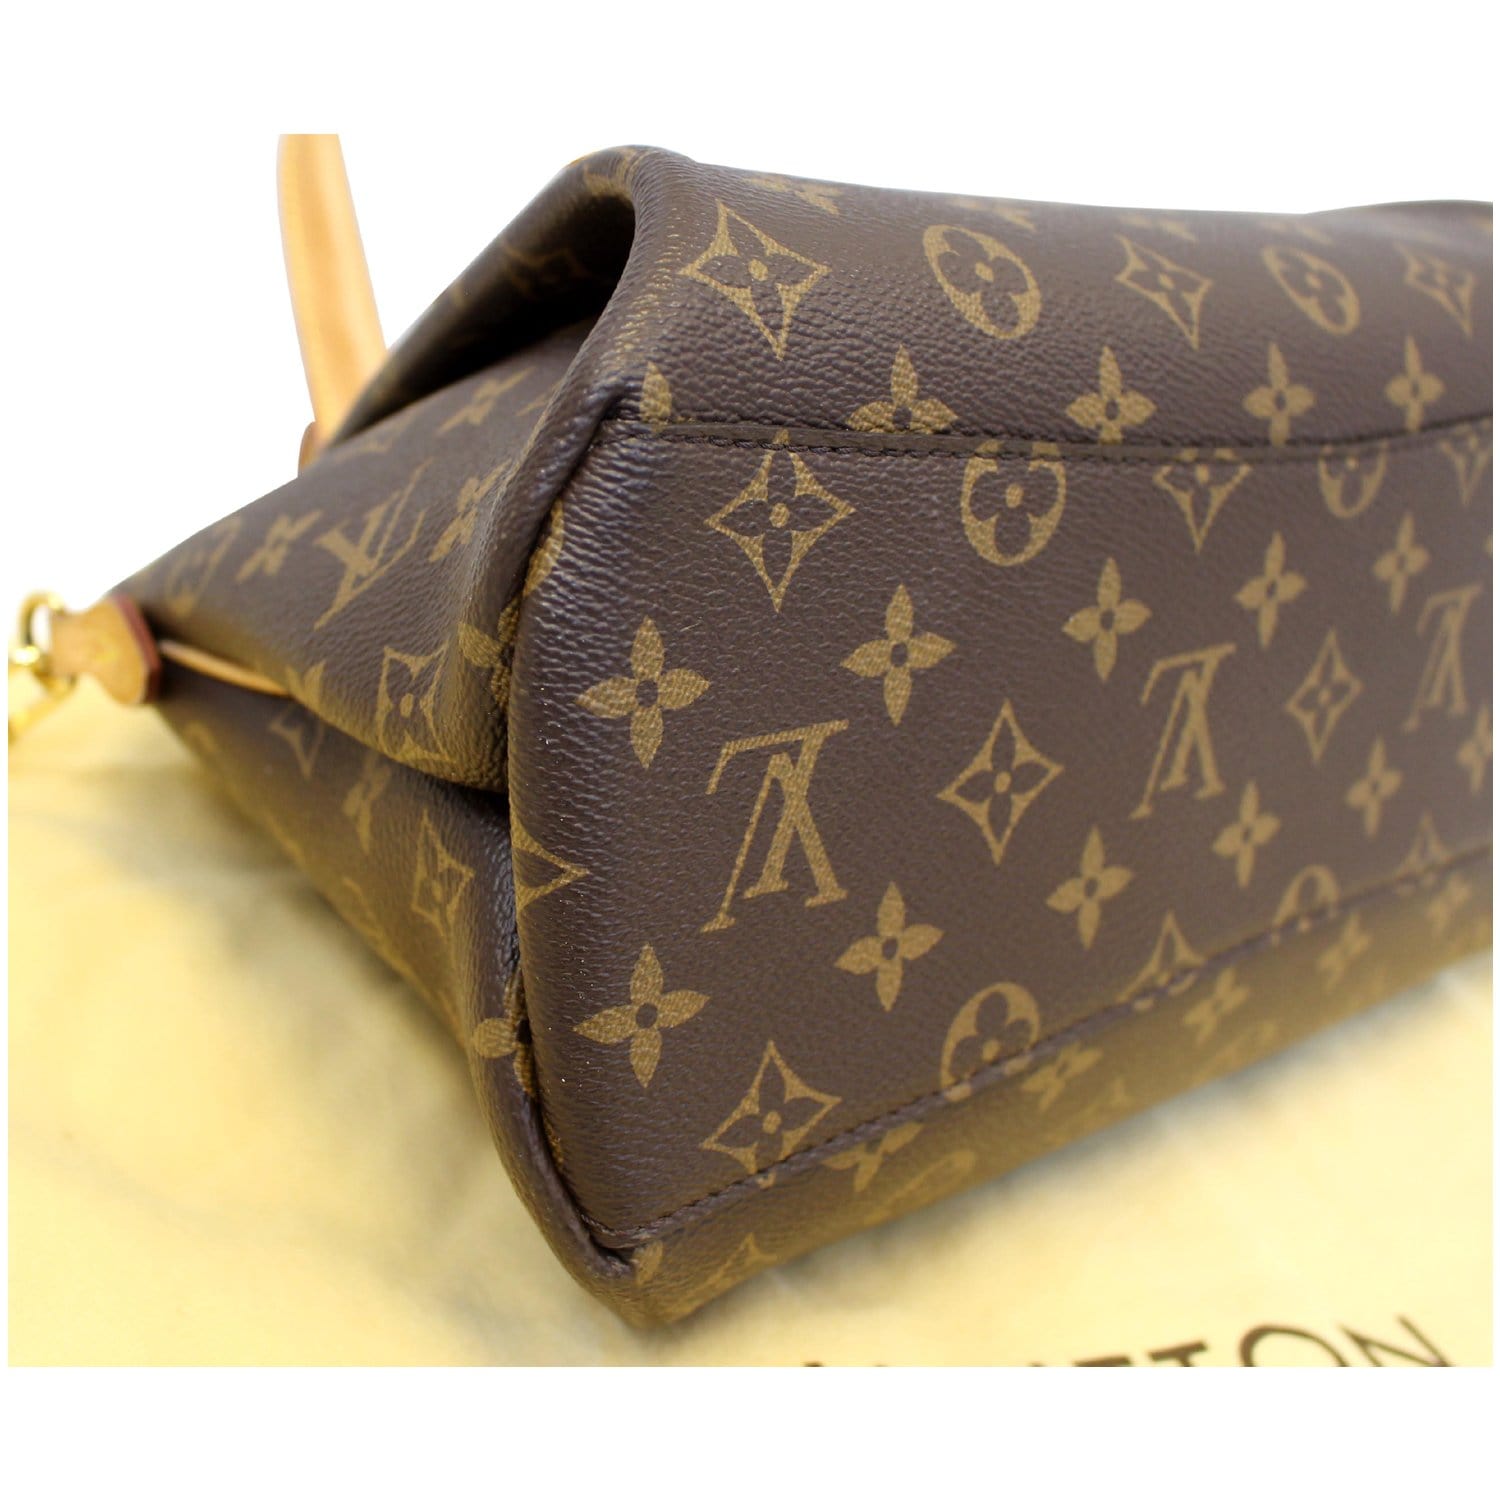 Authentic LV Rivoli PM, discontinued in this size, excellent condition,  comes with dust bag and receipt.